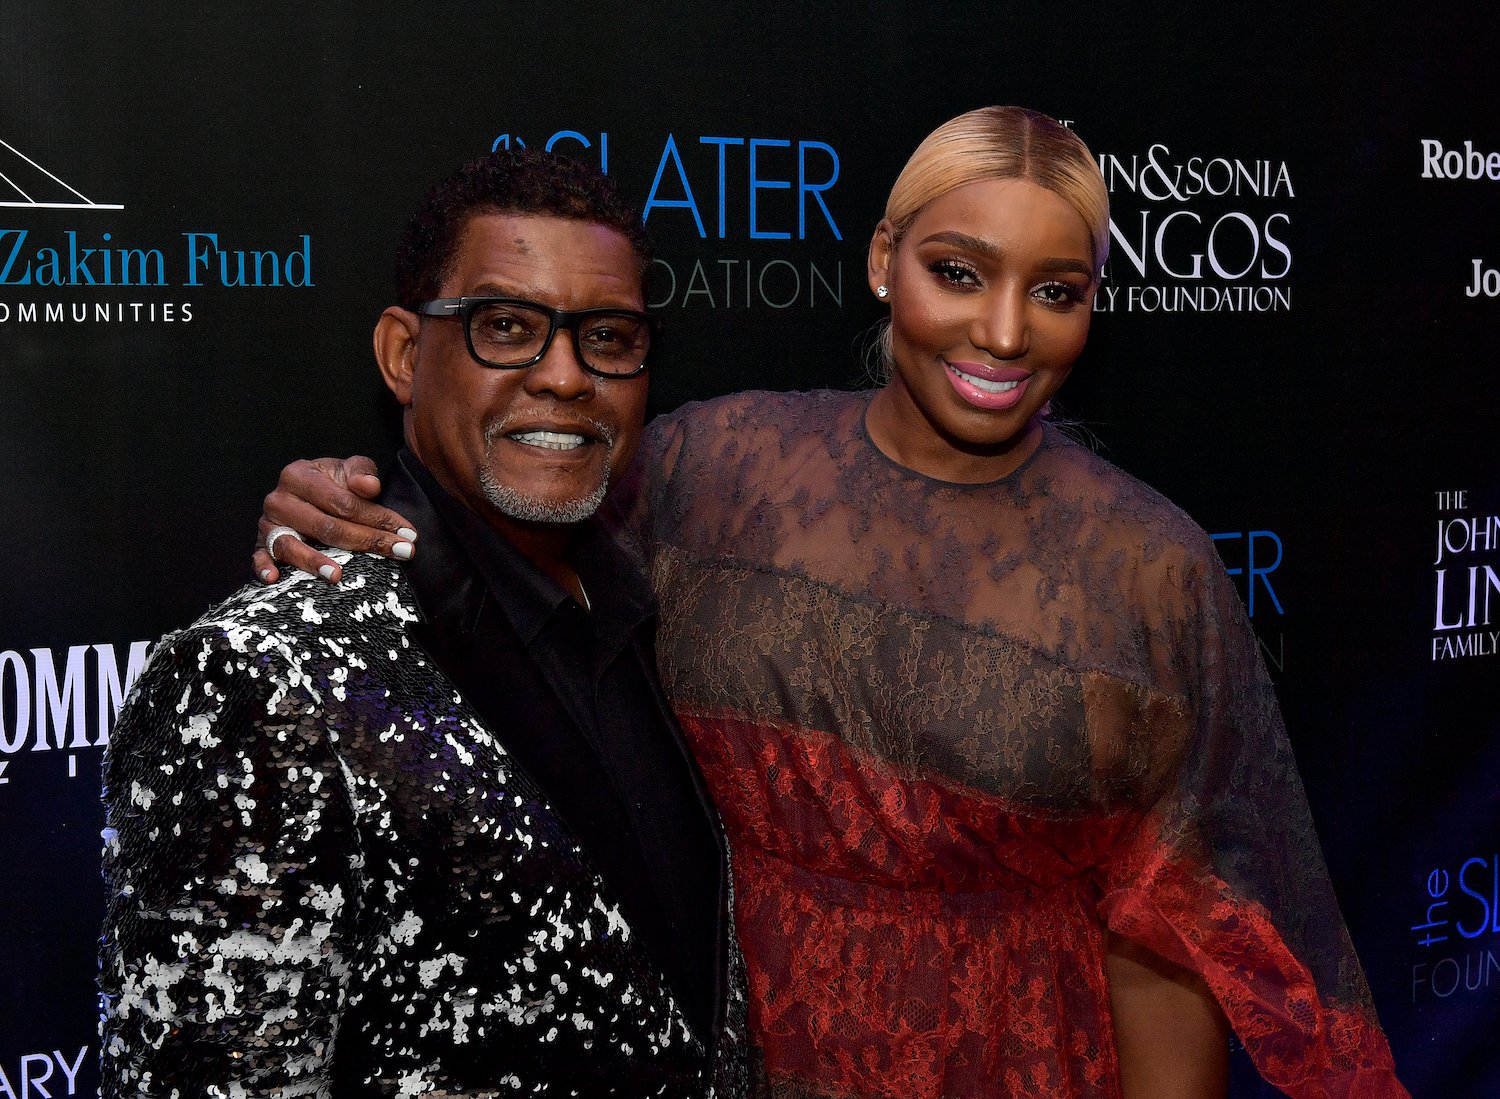 Gregg and Nene Leakes smiling during an event in Boston City in 2018